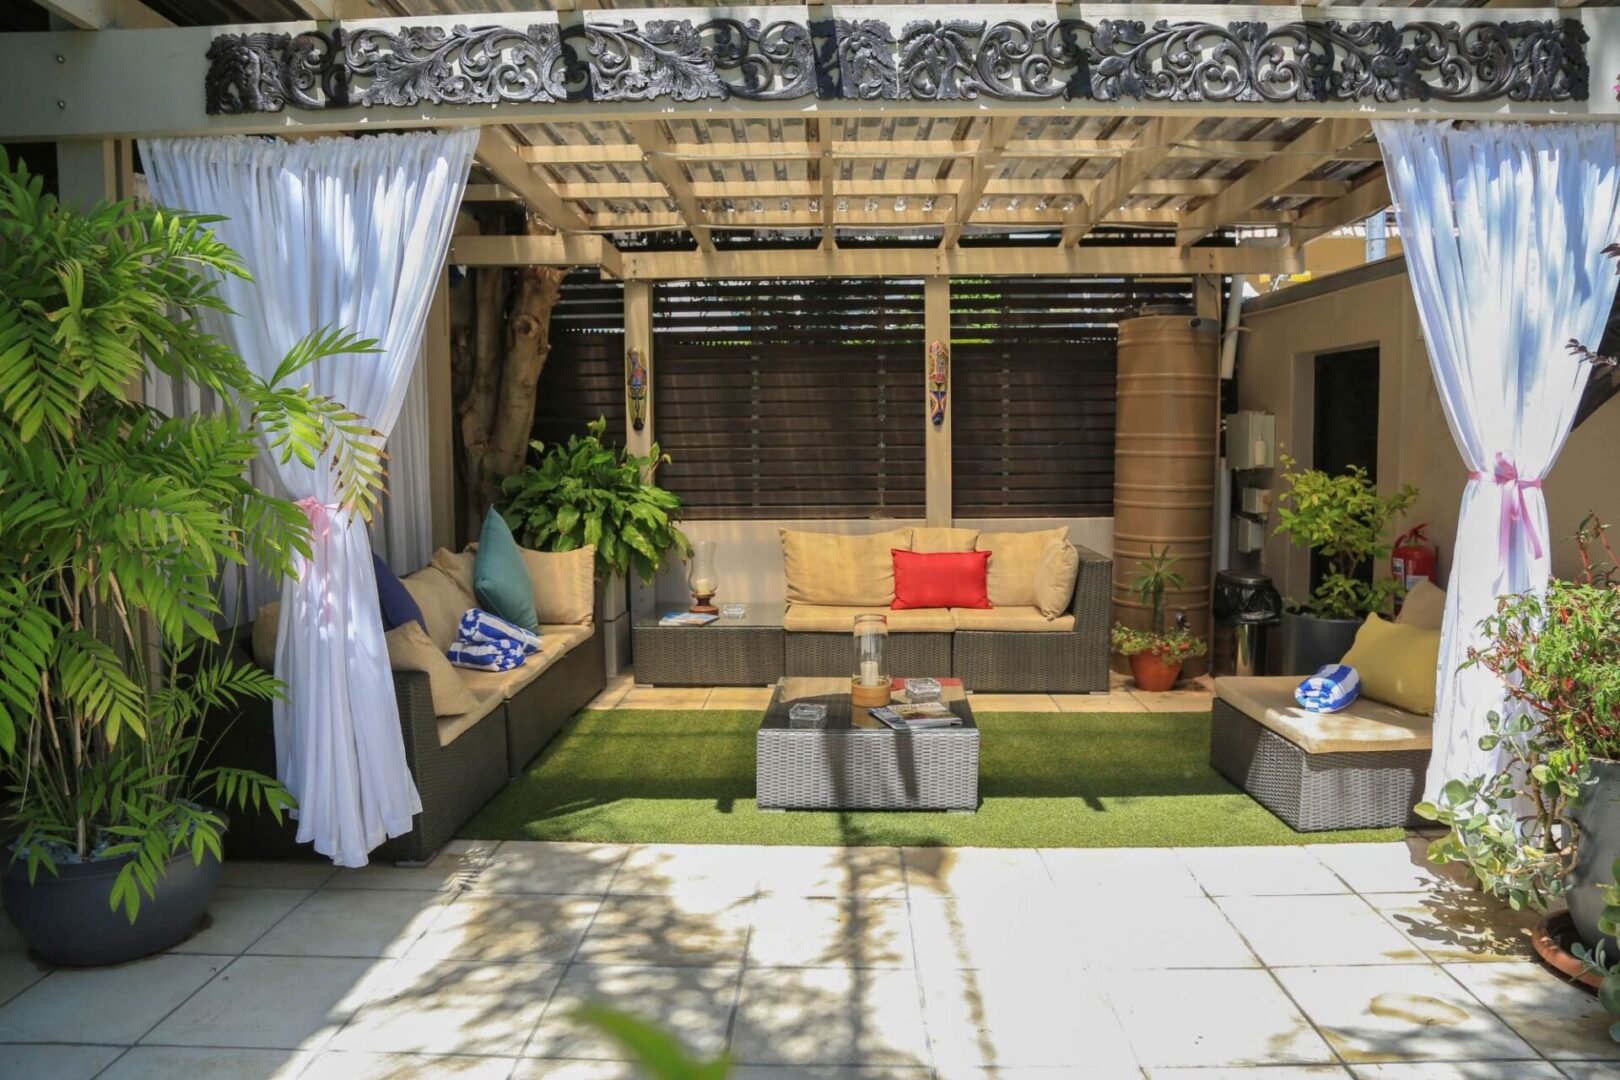 A patio with furniture and plants in it.